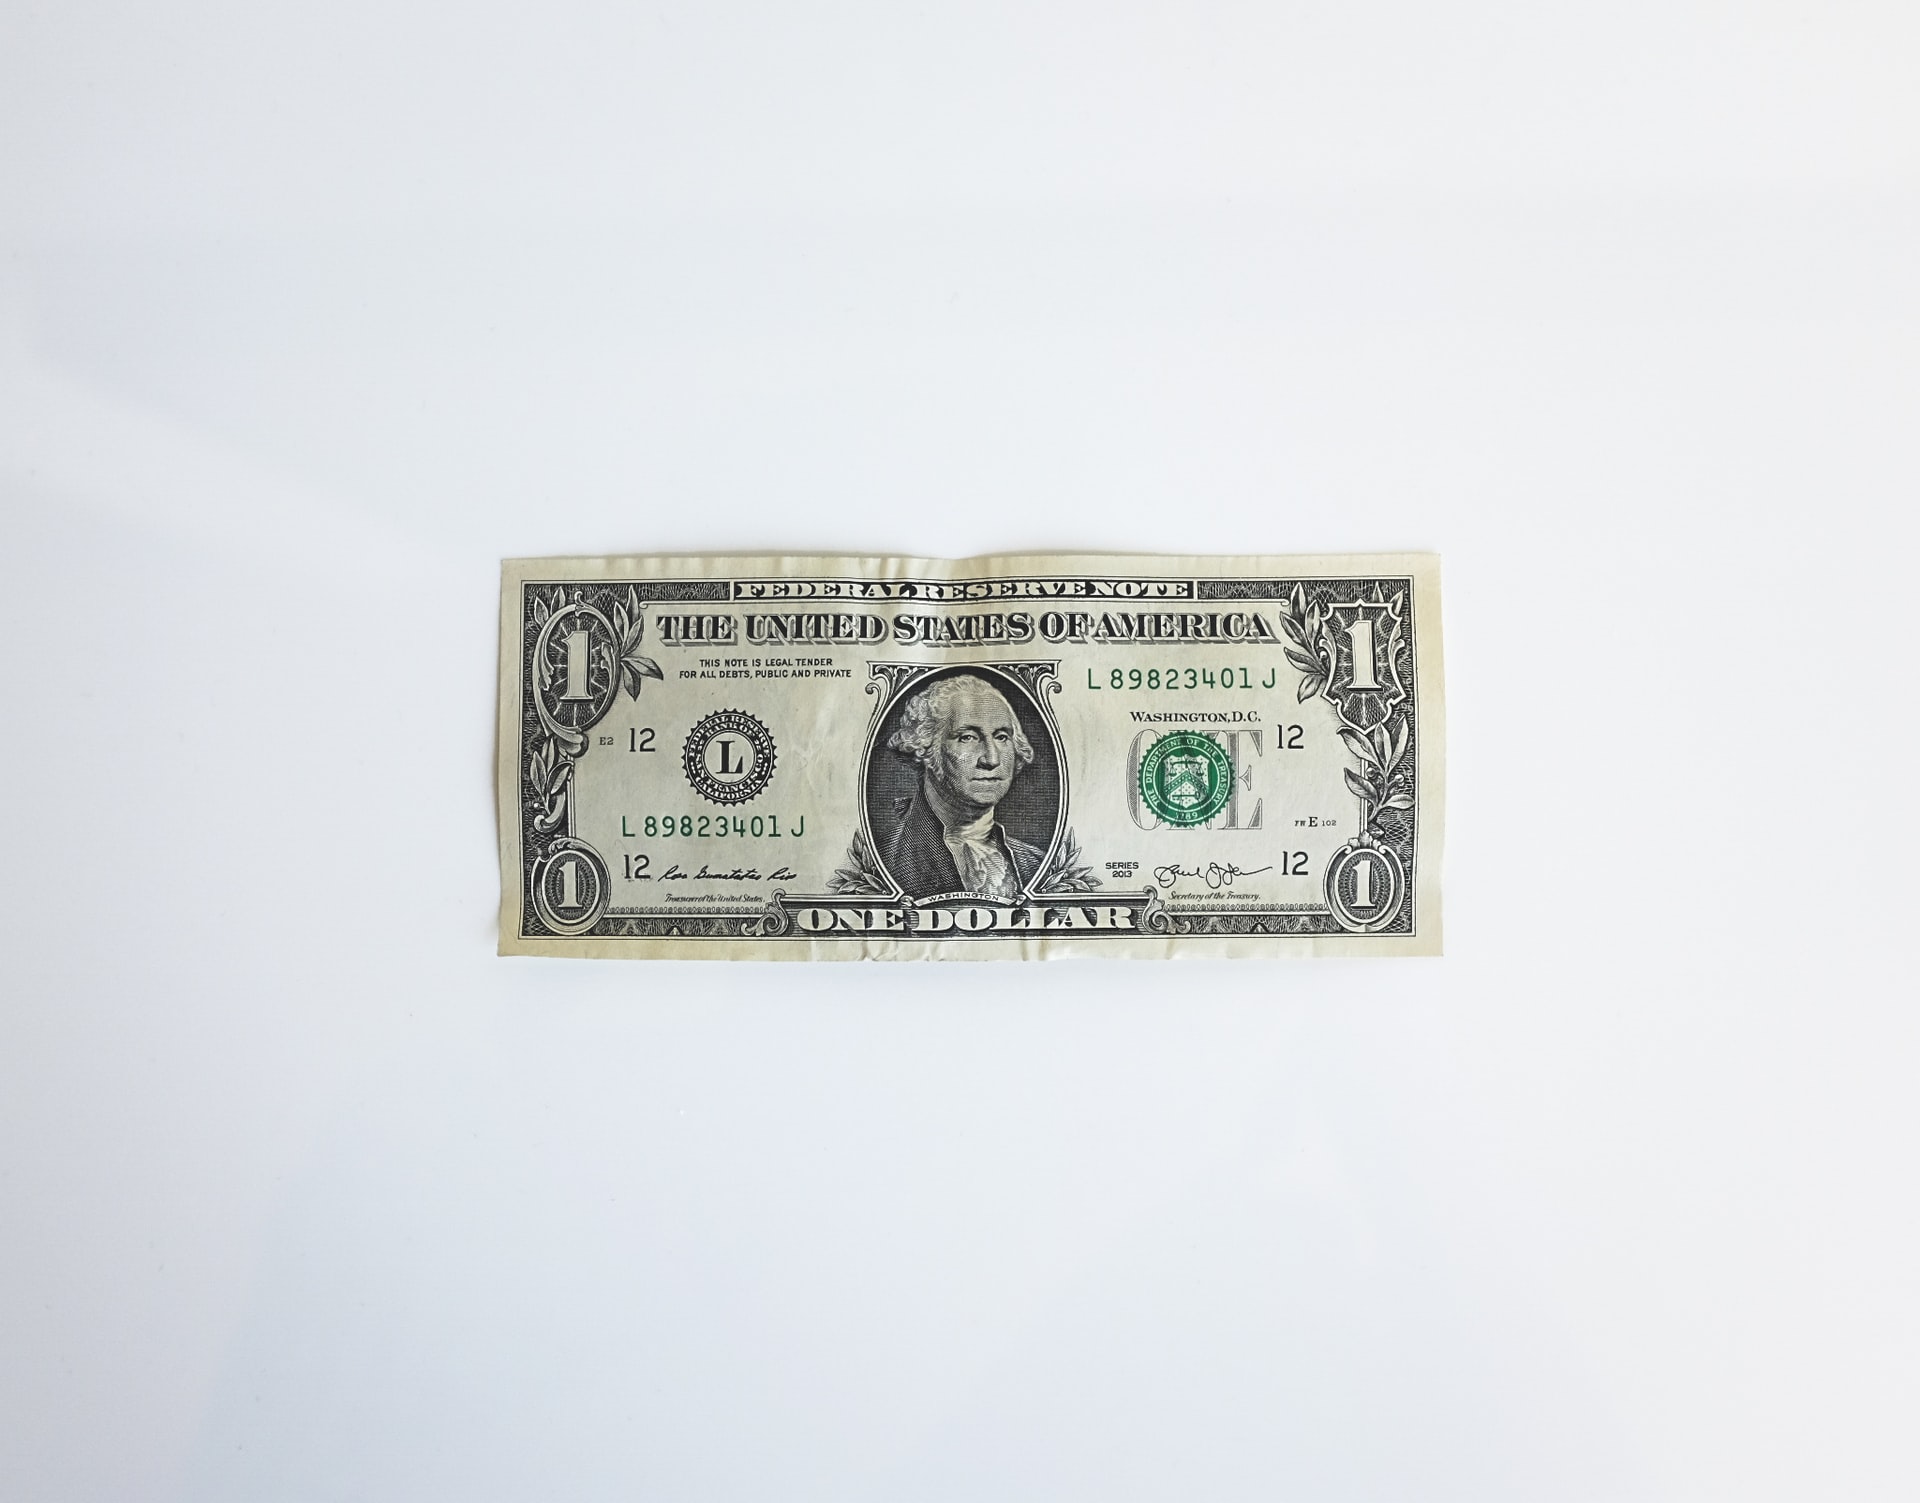 Photo of a one dollar bill. Such money can be acquired as part of coronavirus relief efforts